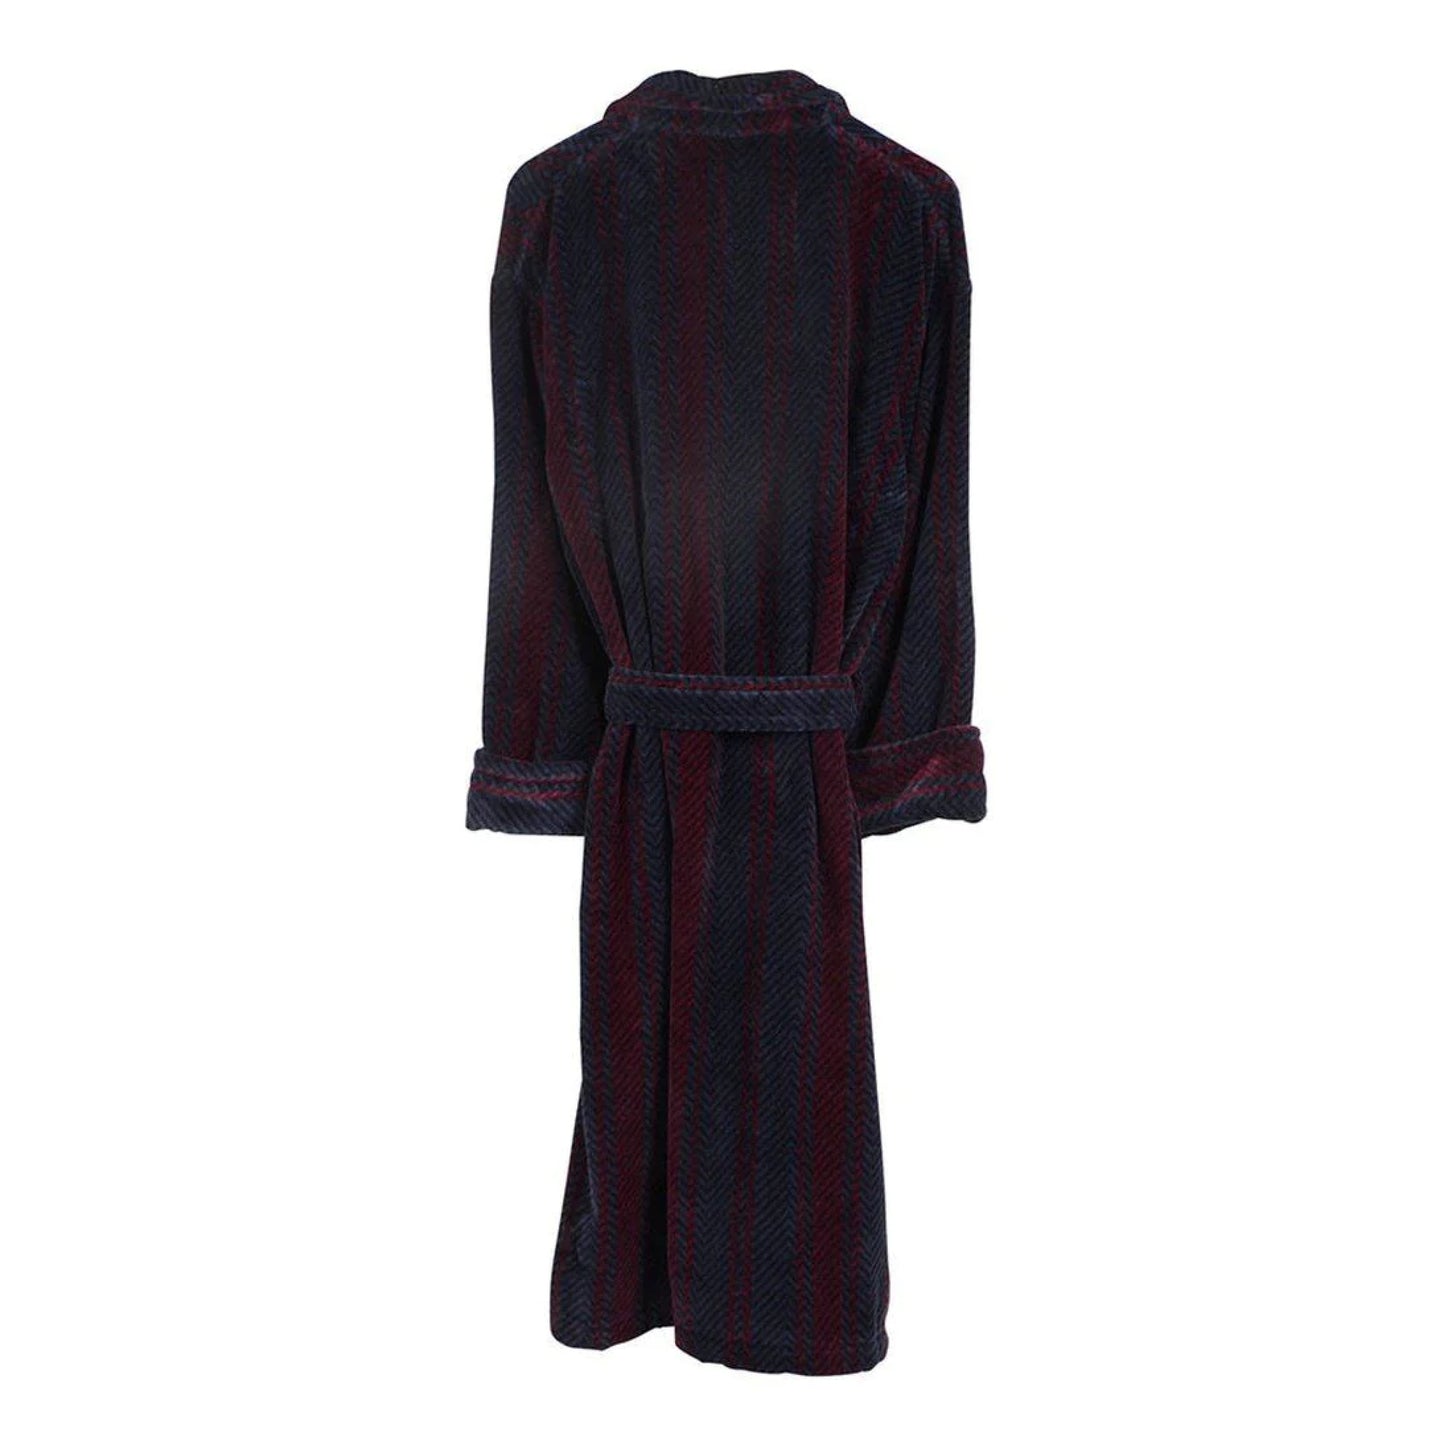 Bown of London Arbroath Dressing Gown